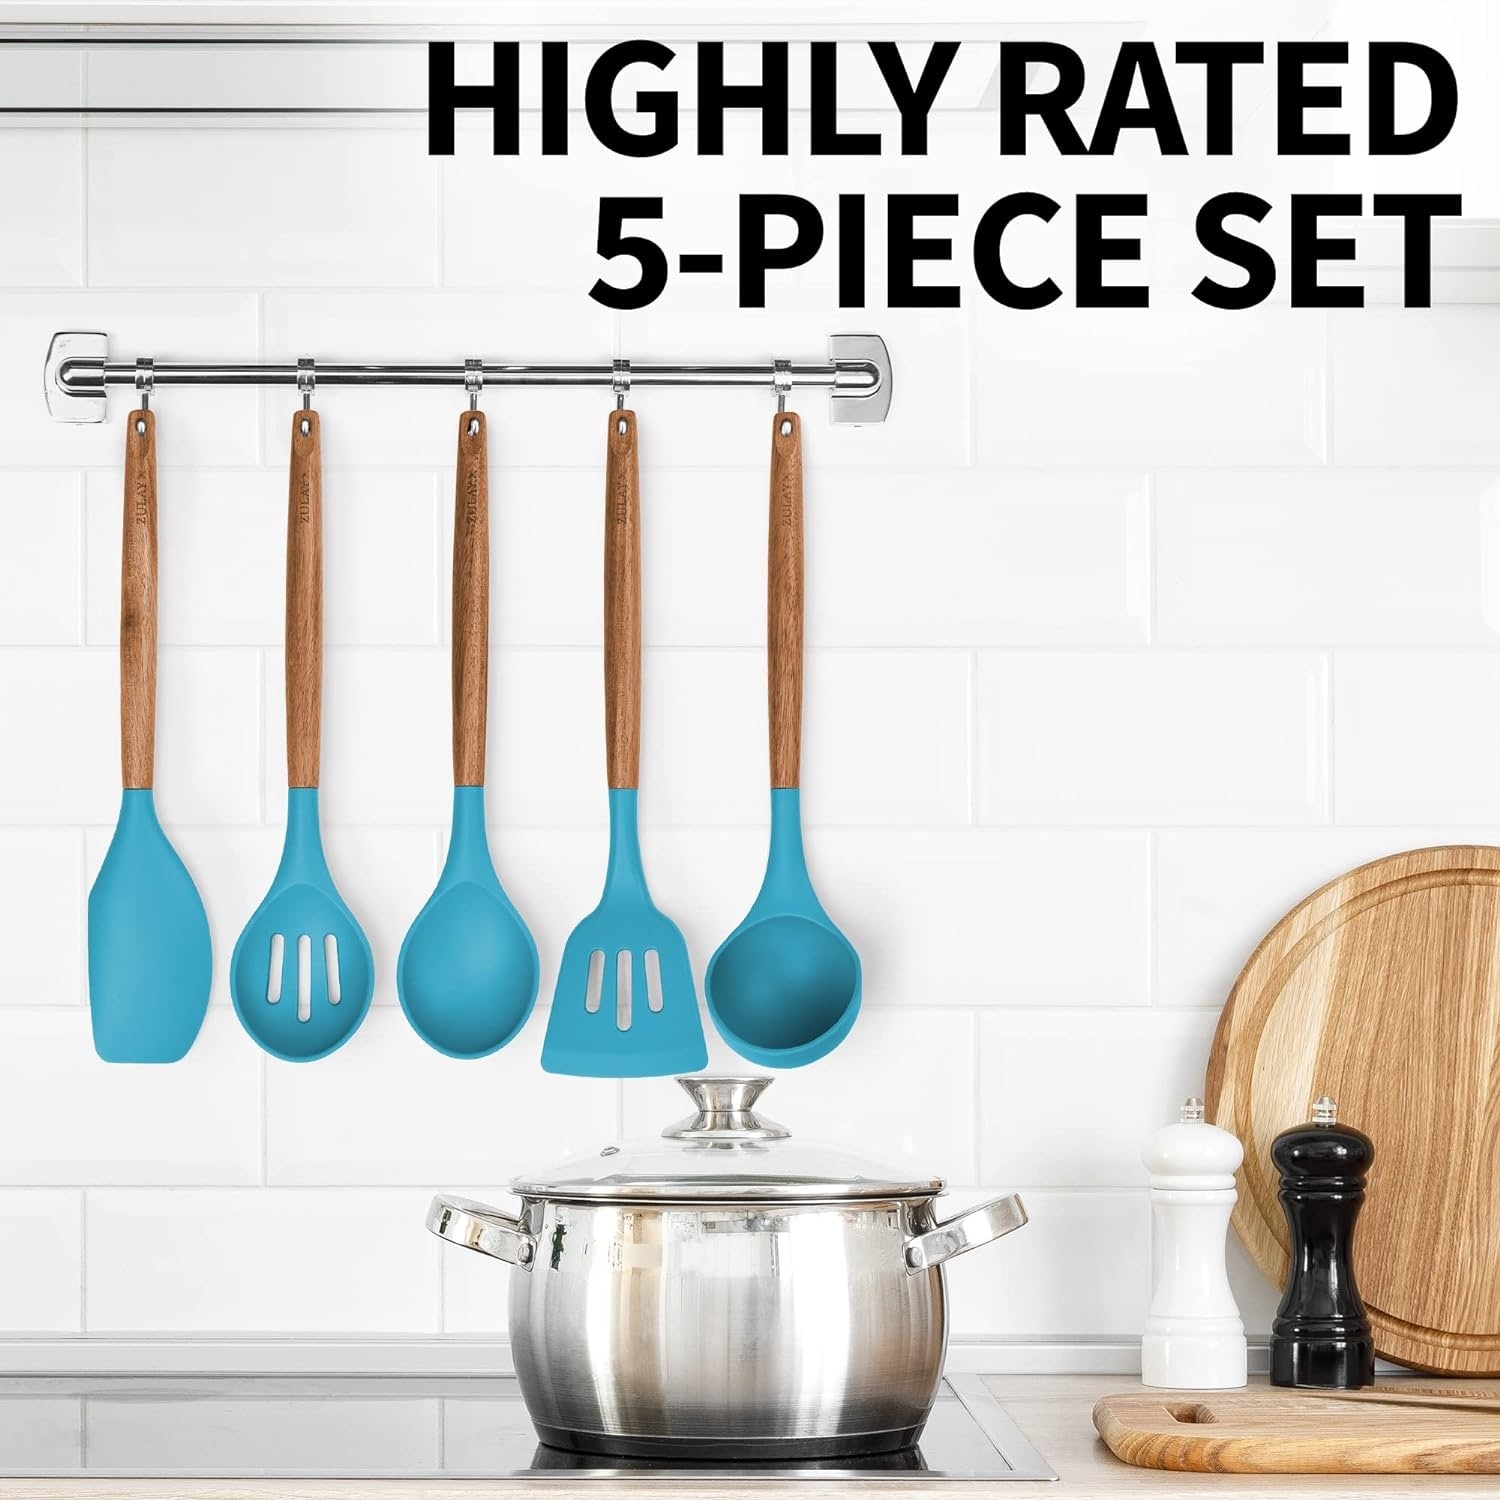 https://ak1.ostkcdn.com/images/products/is/images/direct/0e2c49571bb6db7da9961678c3ce1080e6271c28/Zulay-Kitchen-Premium-5-Piece-Silicone-Utensils-Set-with-Authentic-Acacia-Hardwood-Handles.jpg